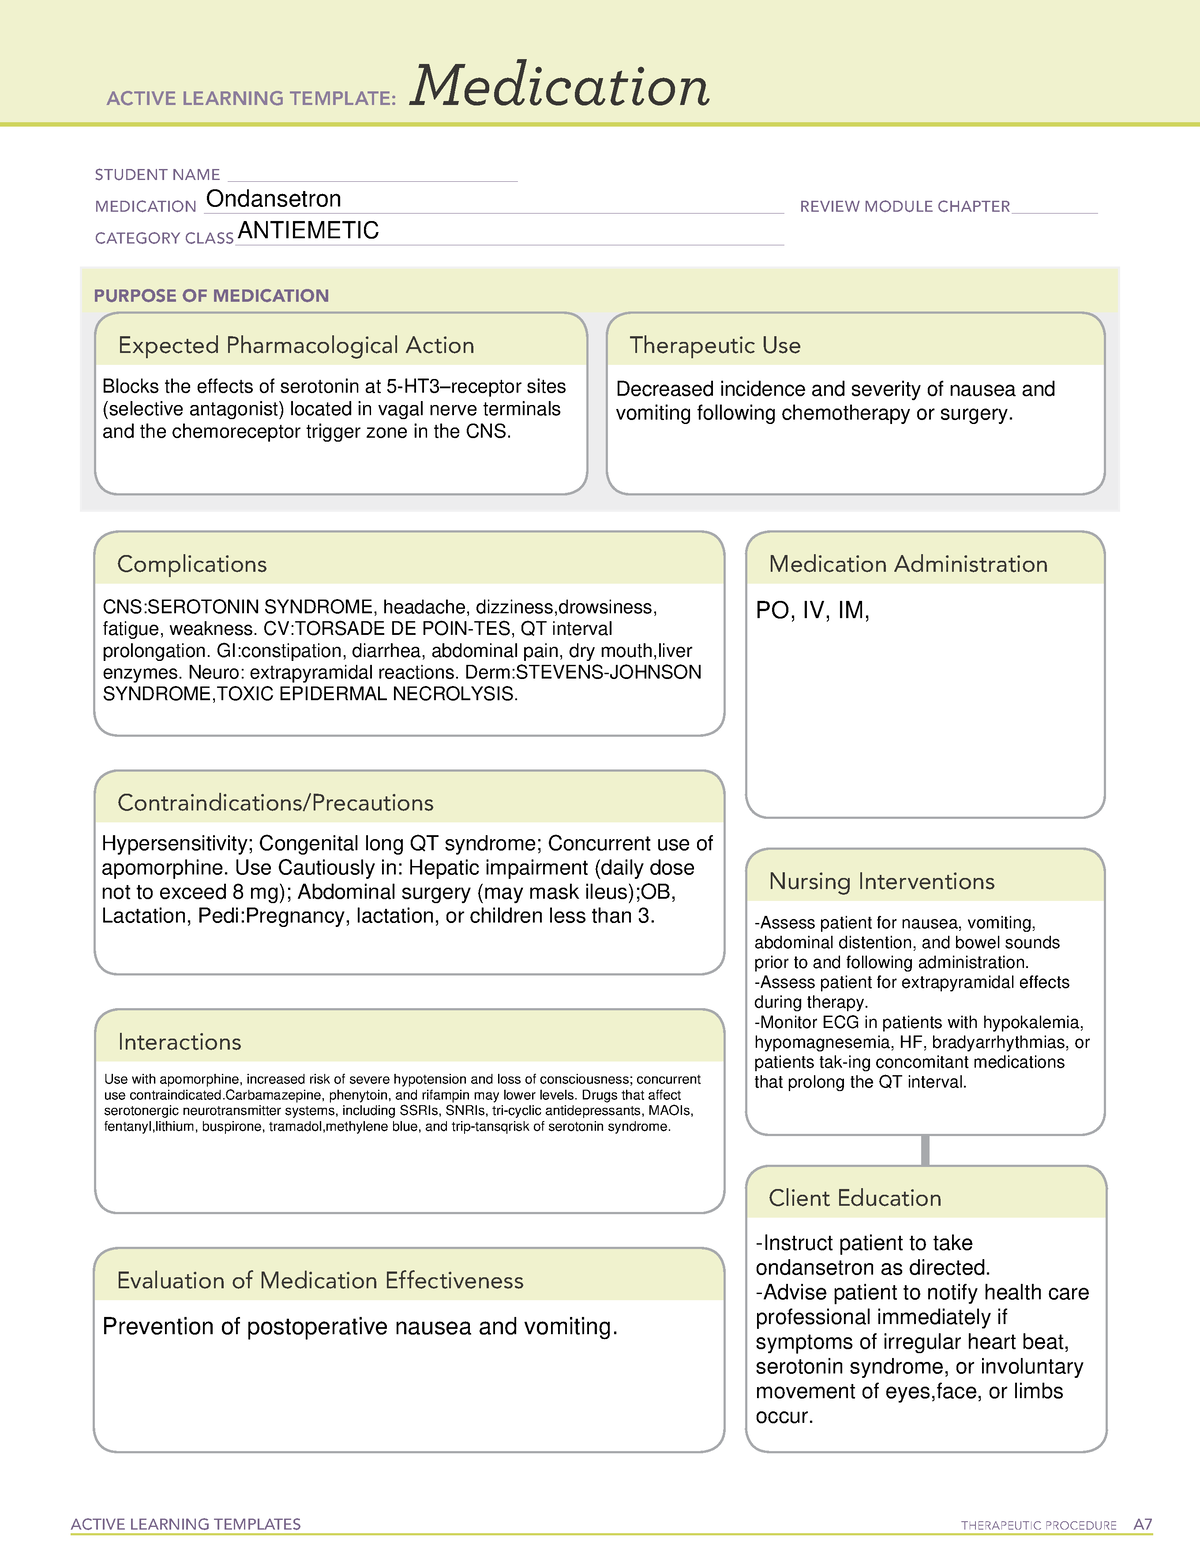 ondansetron-ati-template-active-learning-templates-therapeutic-procedure-a-medication-student